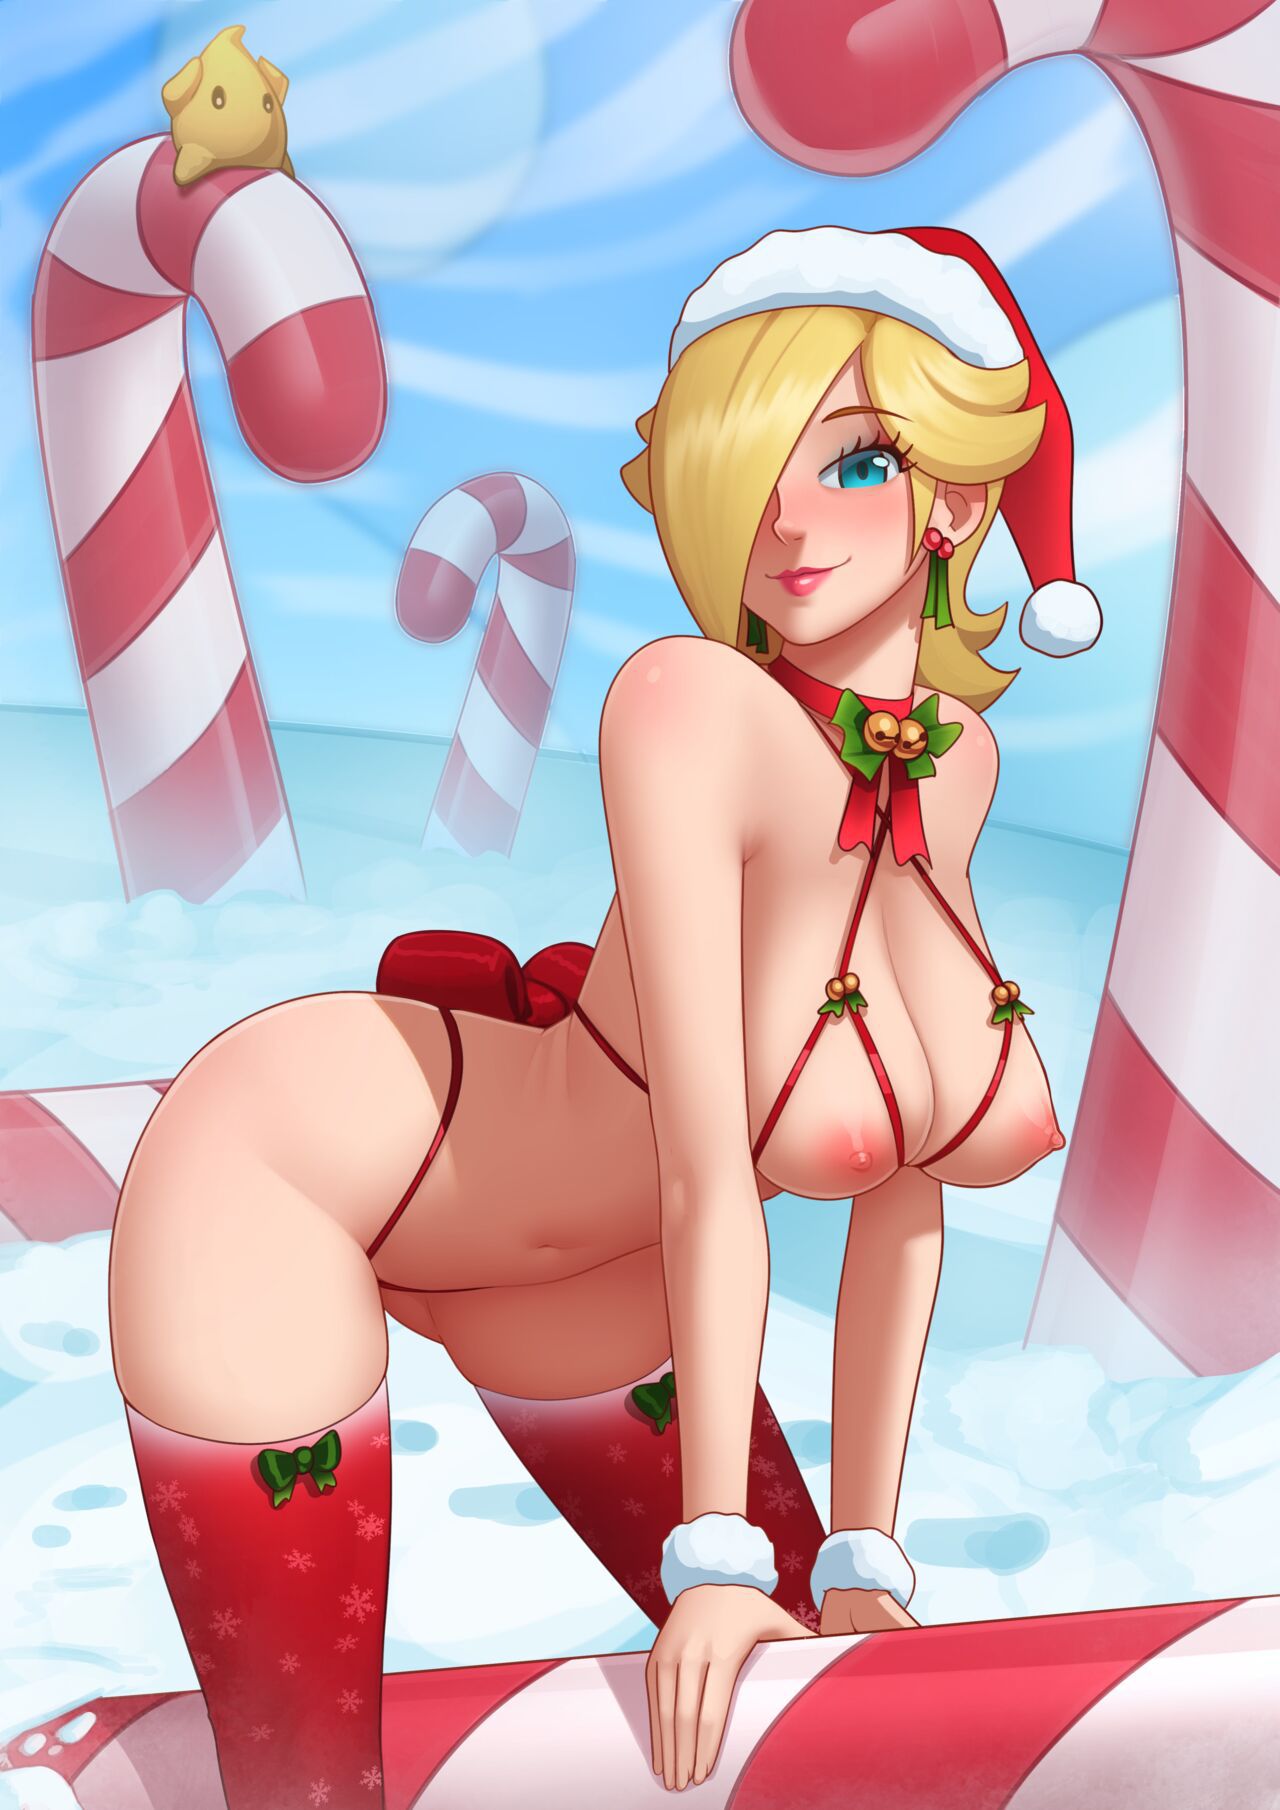 [Deilan12] Candy Canes Appeared 9